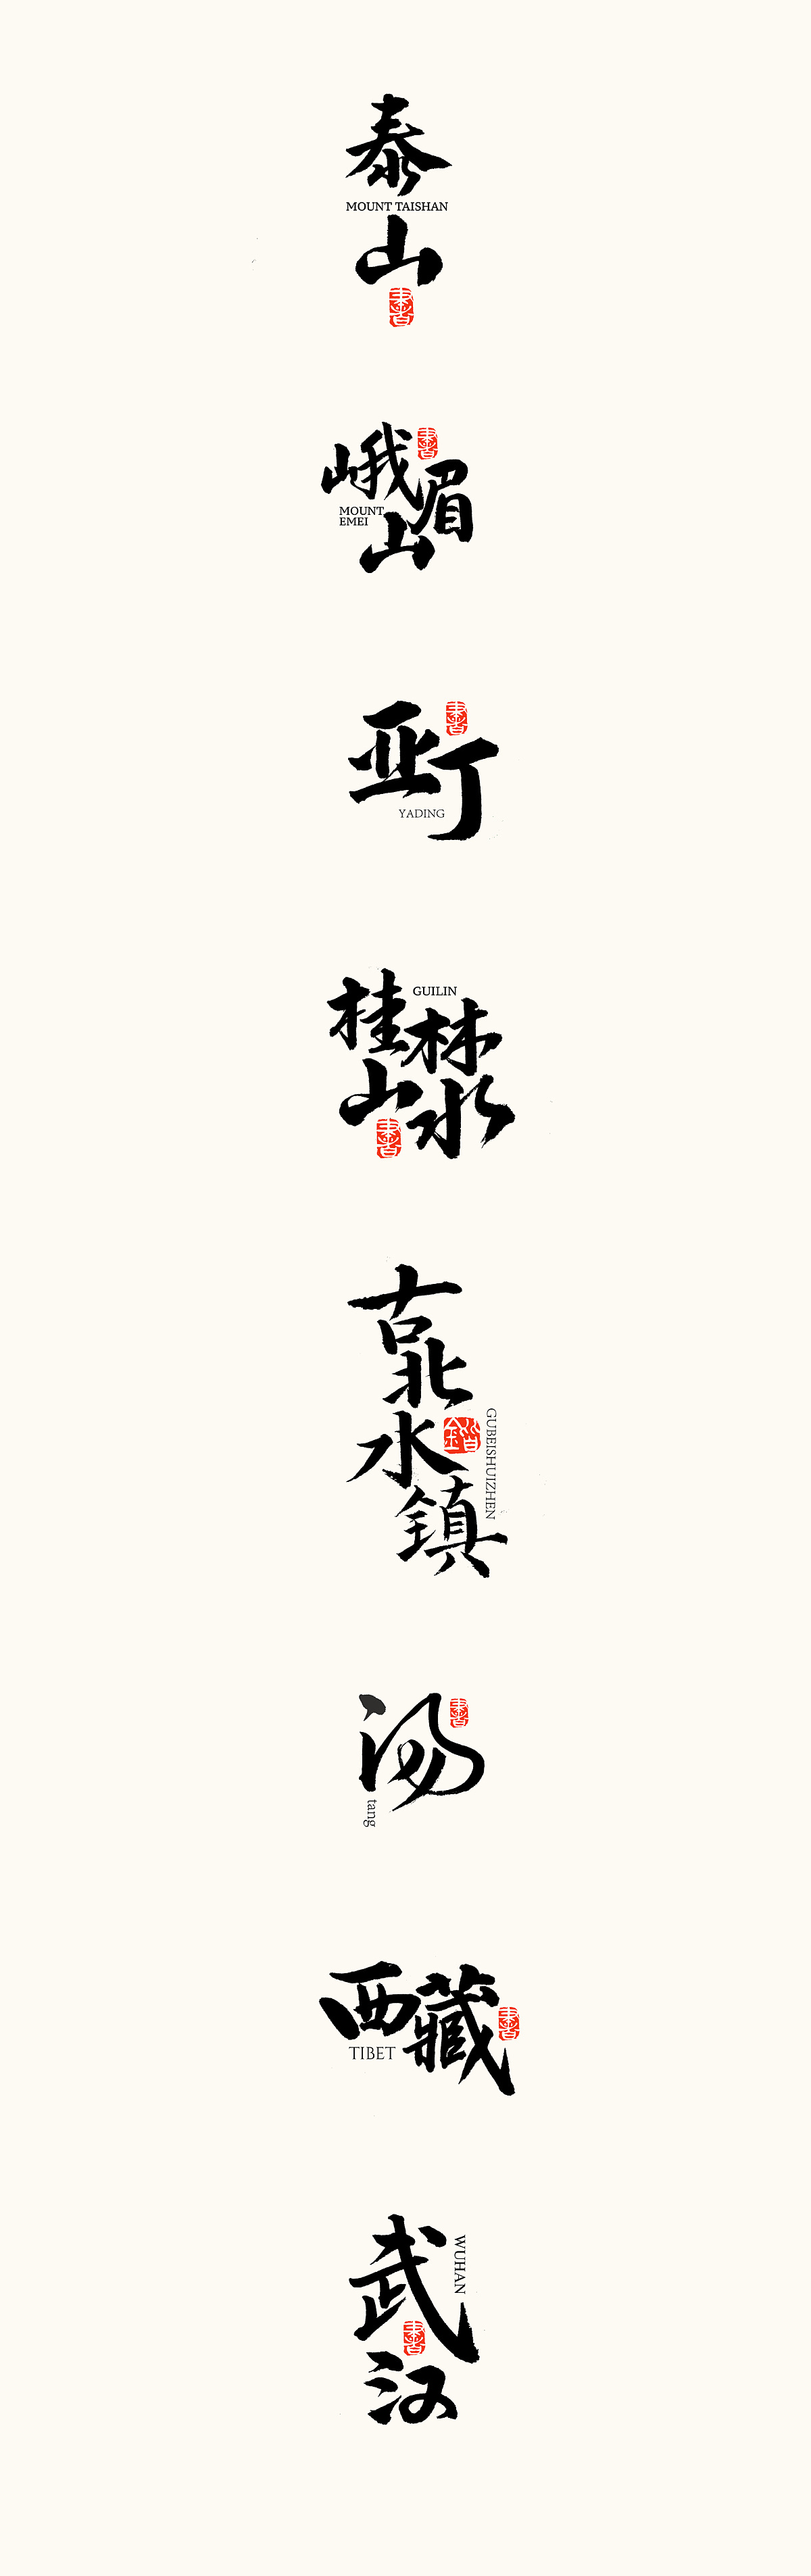 Some recent Calligraphy Font